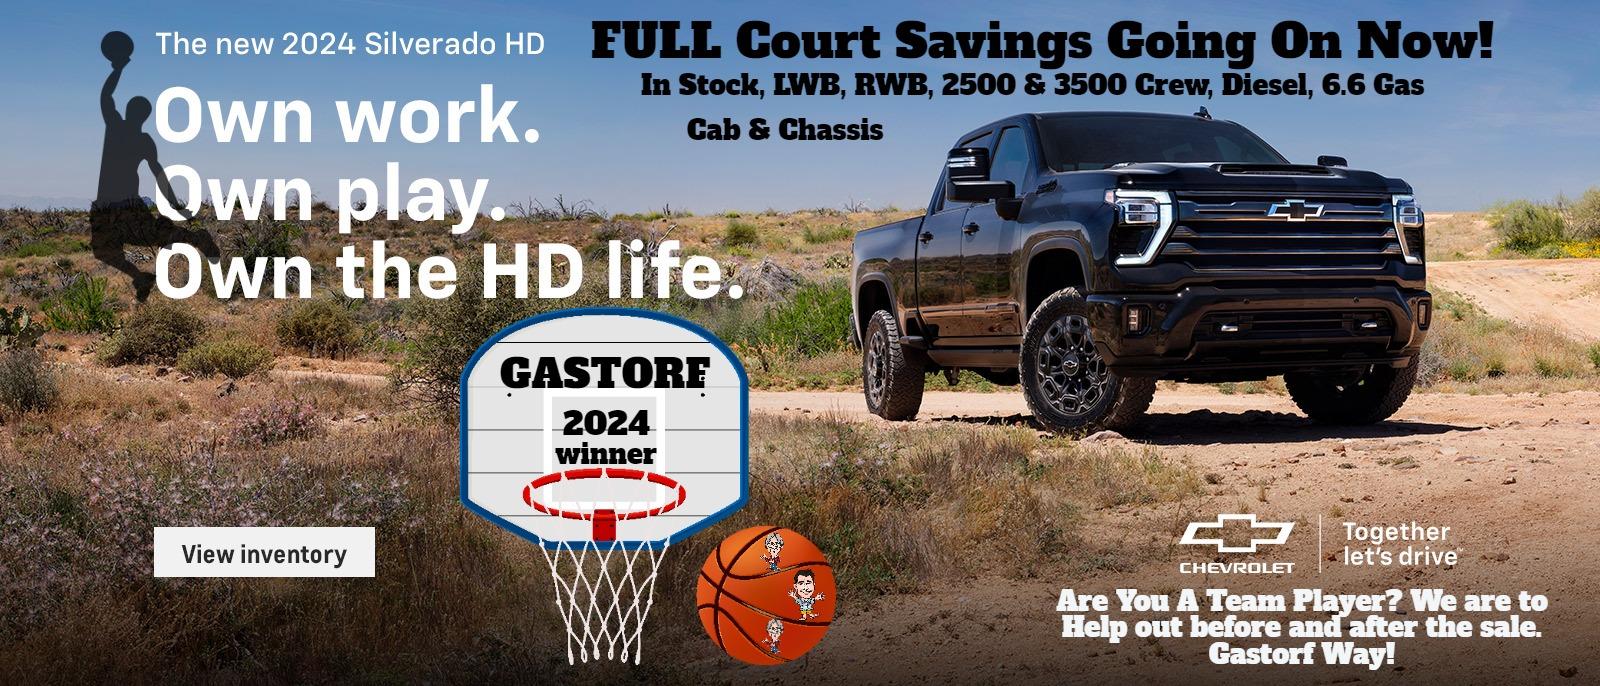 The new 2024 Chevy Silverado HD. Own work. Own play. Own the HD life.